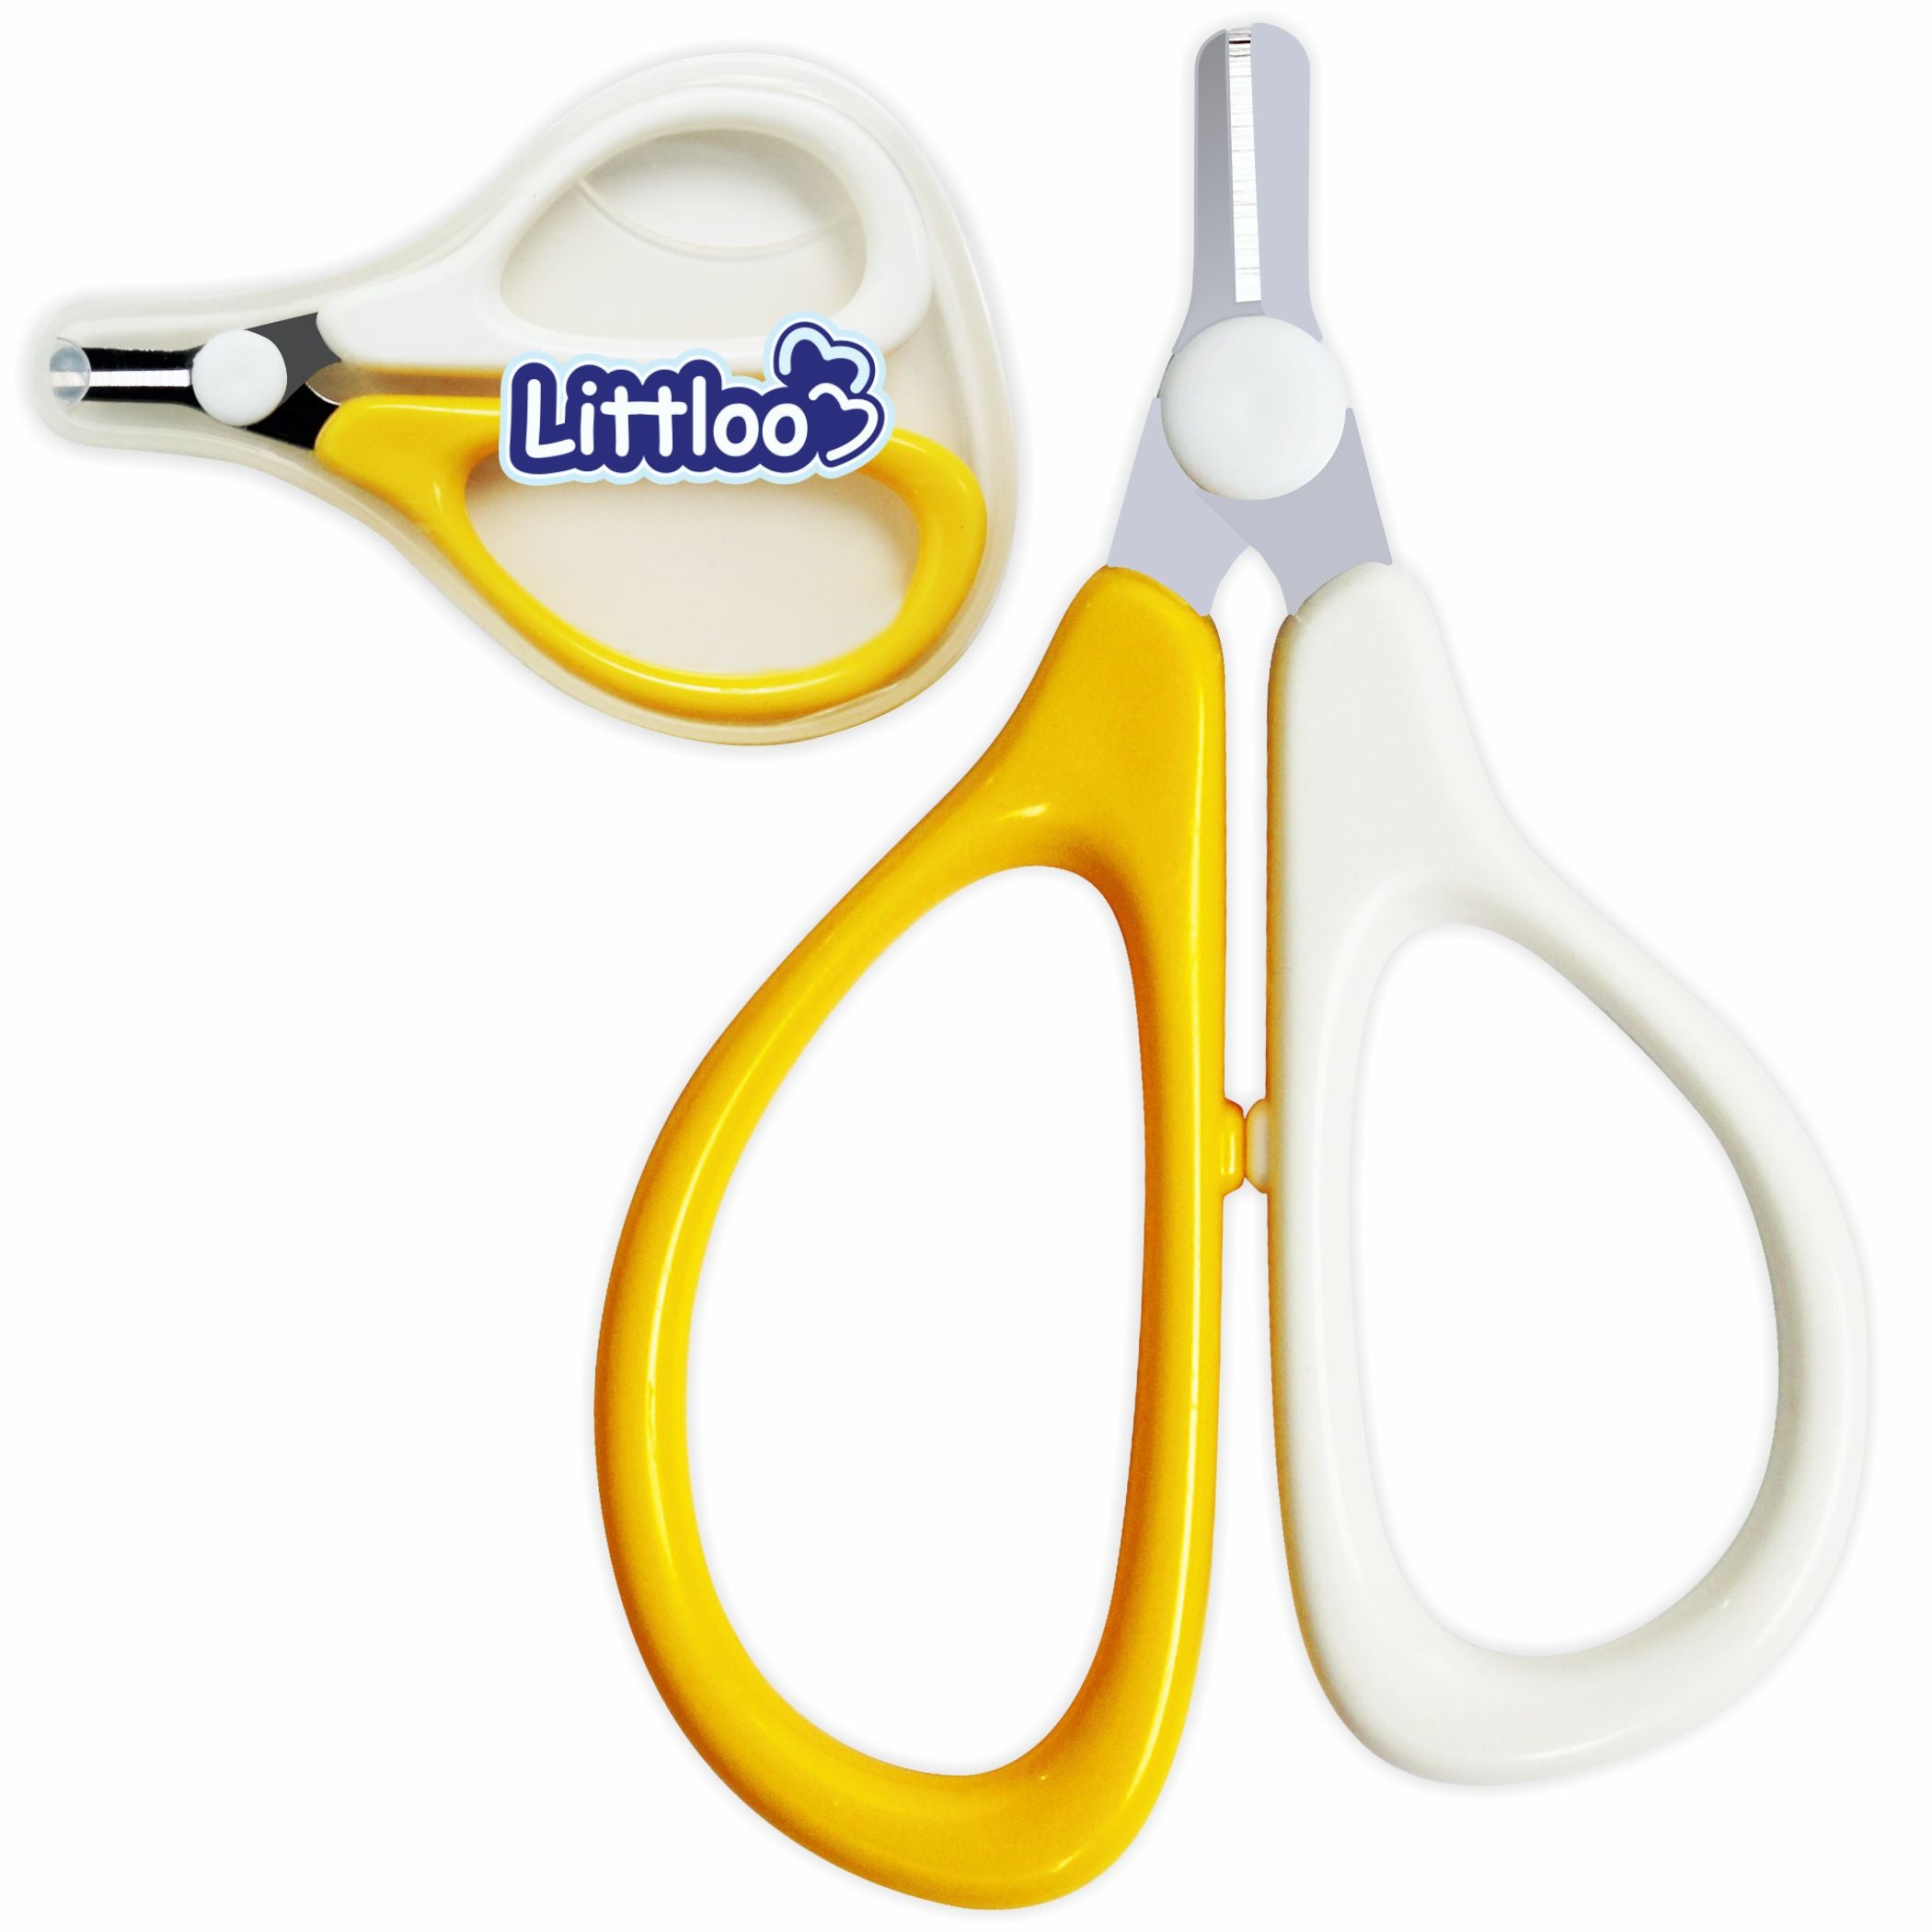 Littloo Baby Nail Scissors - Gentle and Precise Nail Care for Your Little One | Yellow - Littloo